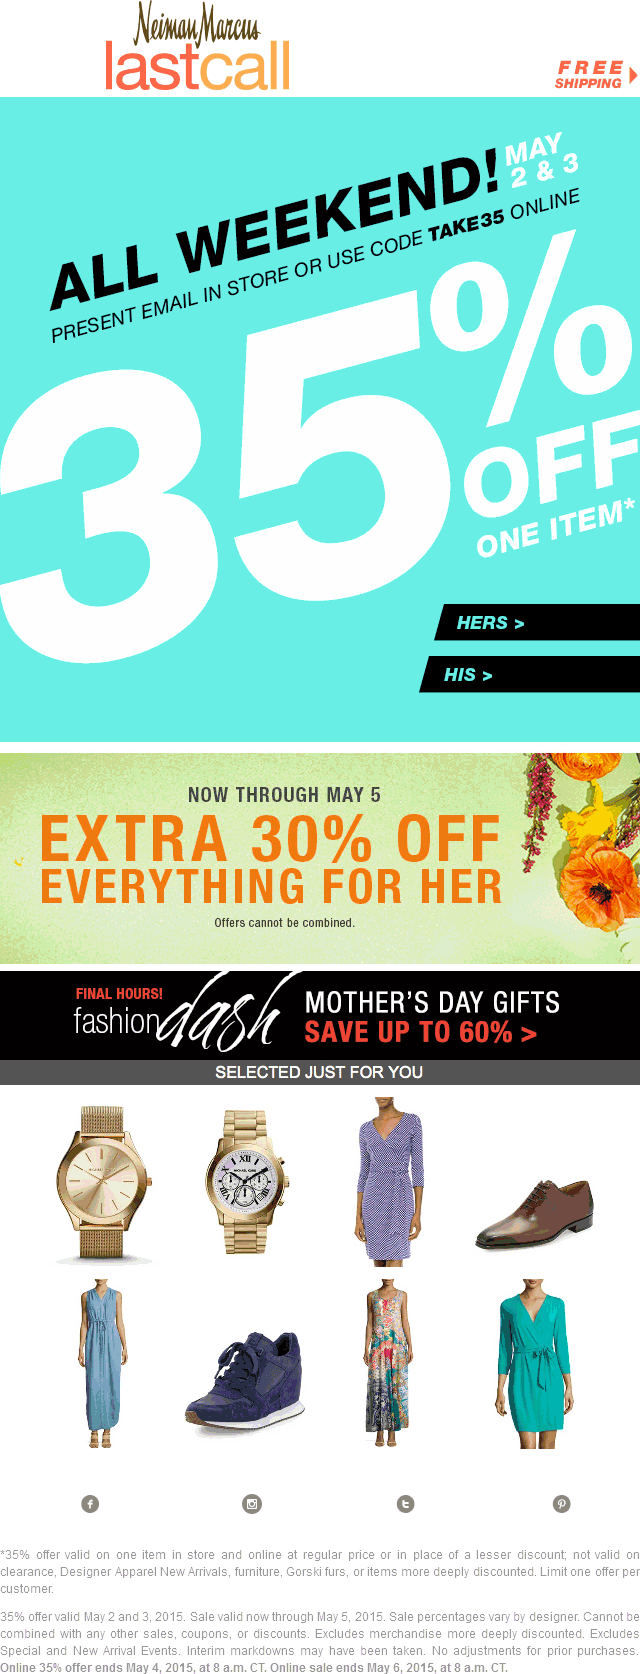 Last Call Coupon April 2024 35% off today at Neiman Marcus Last Call, or online via promo code TAKE35